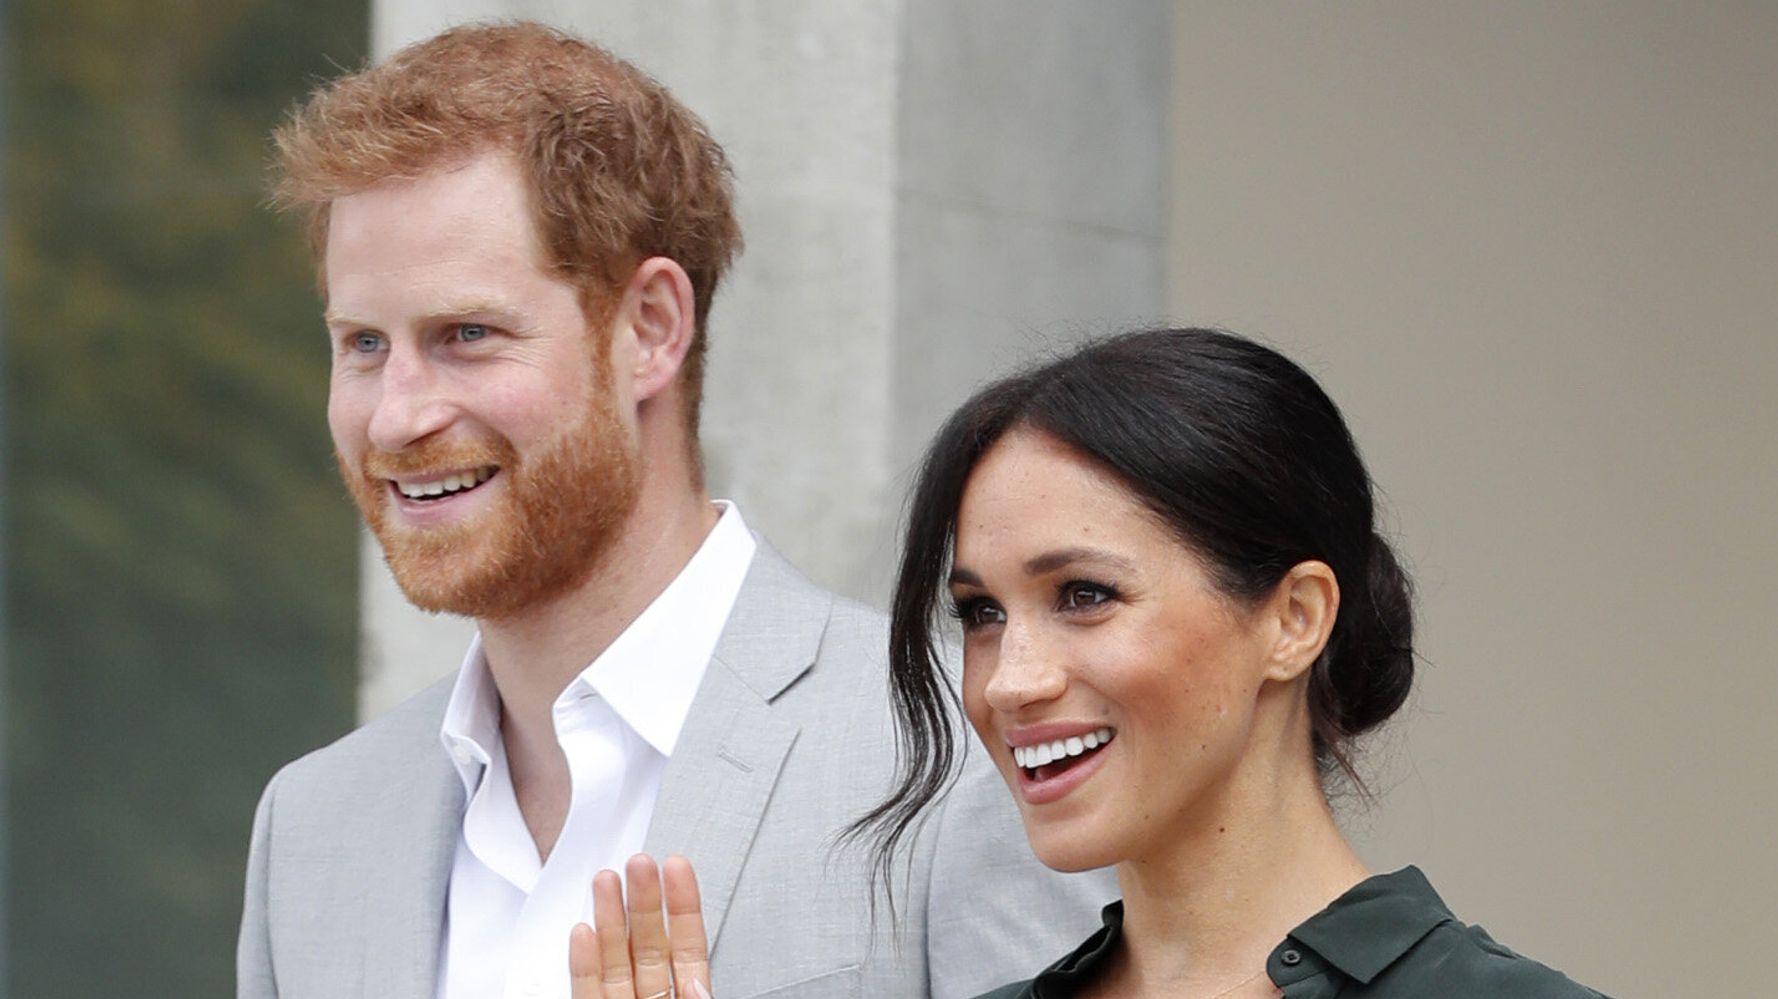 Meghan Markle And Prince Harry Encourage Vaccine Equity: 'Can’t Leave Anybody Behind'